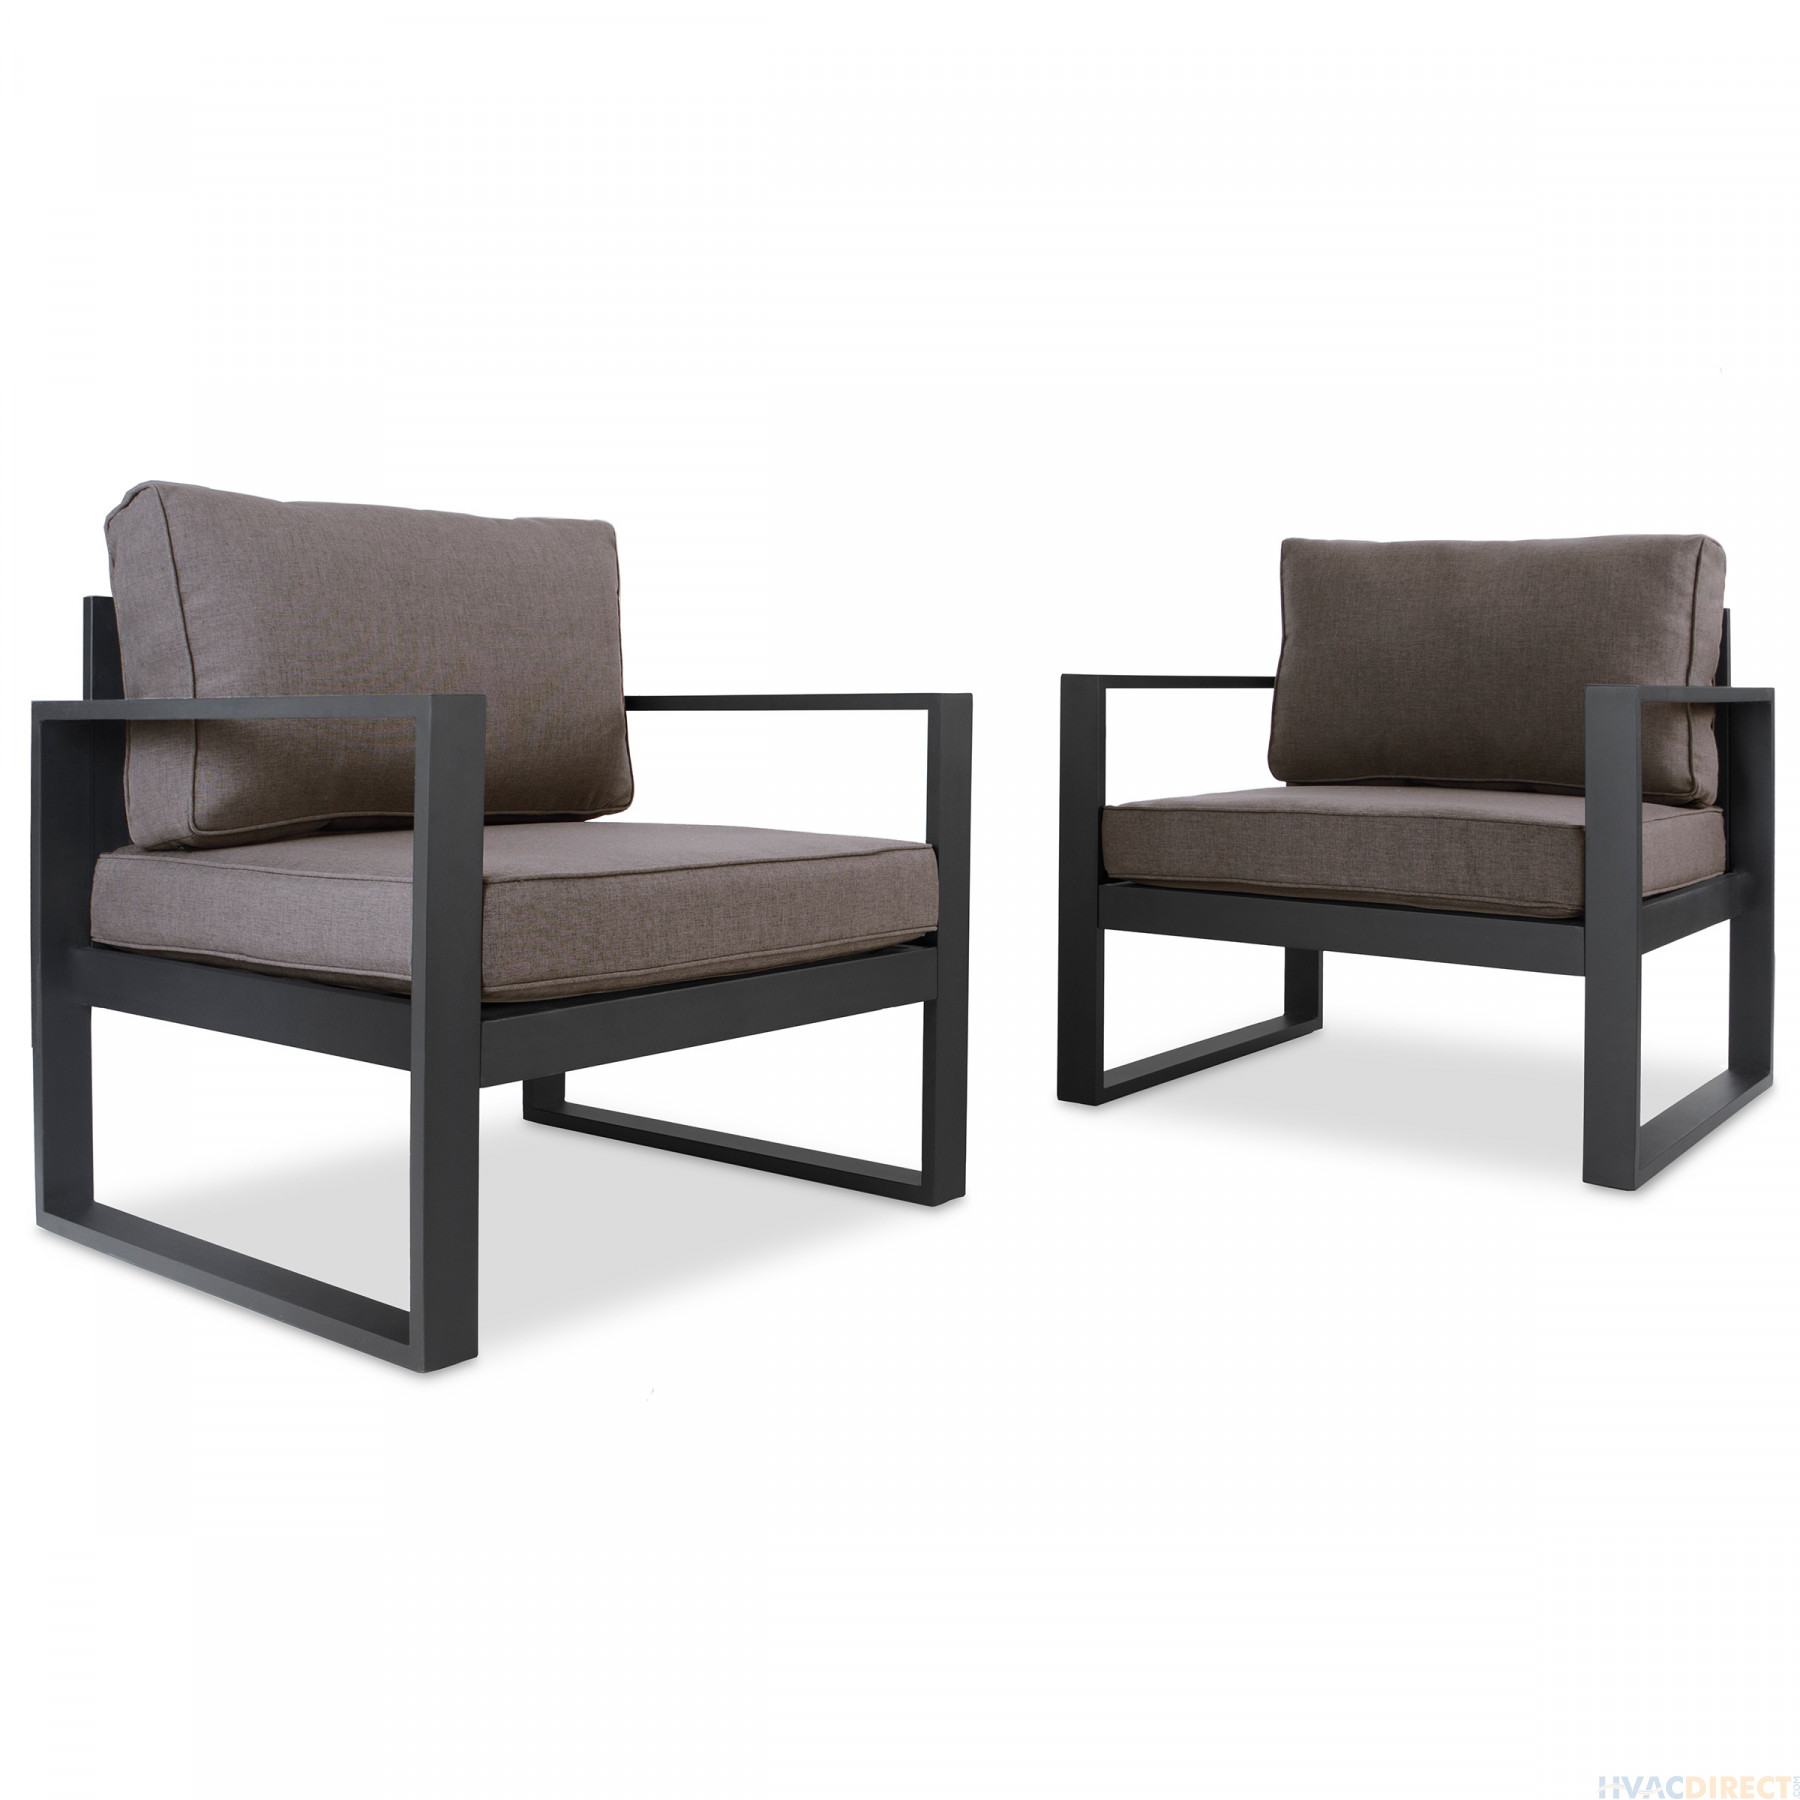 Real Flame Baltic Chair Set (2 Chairs) - Black - 9611-BK